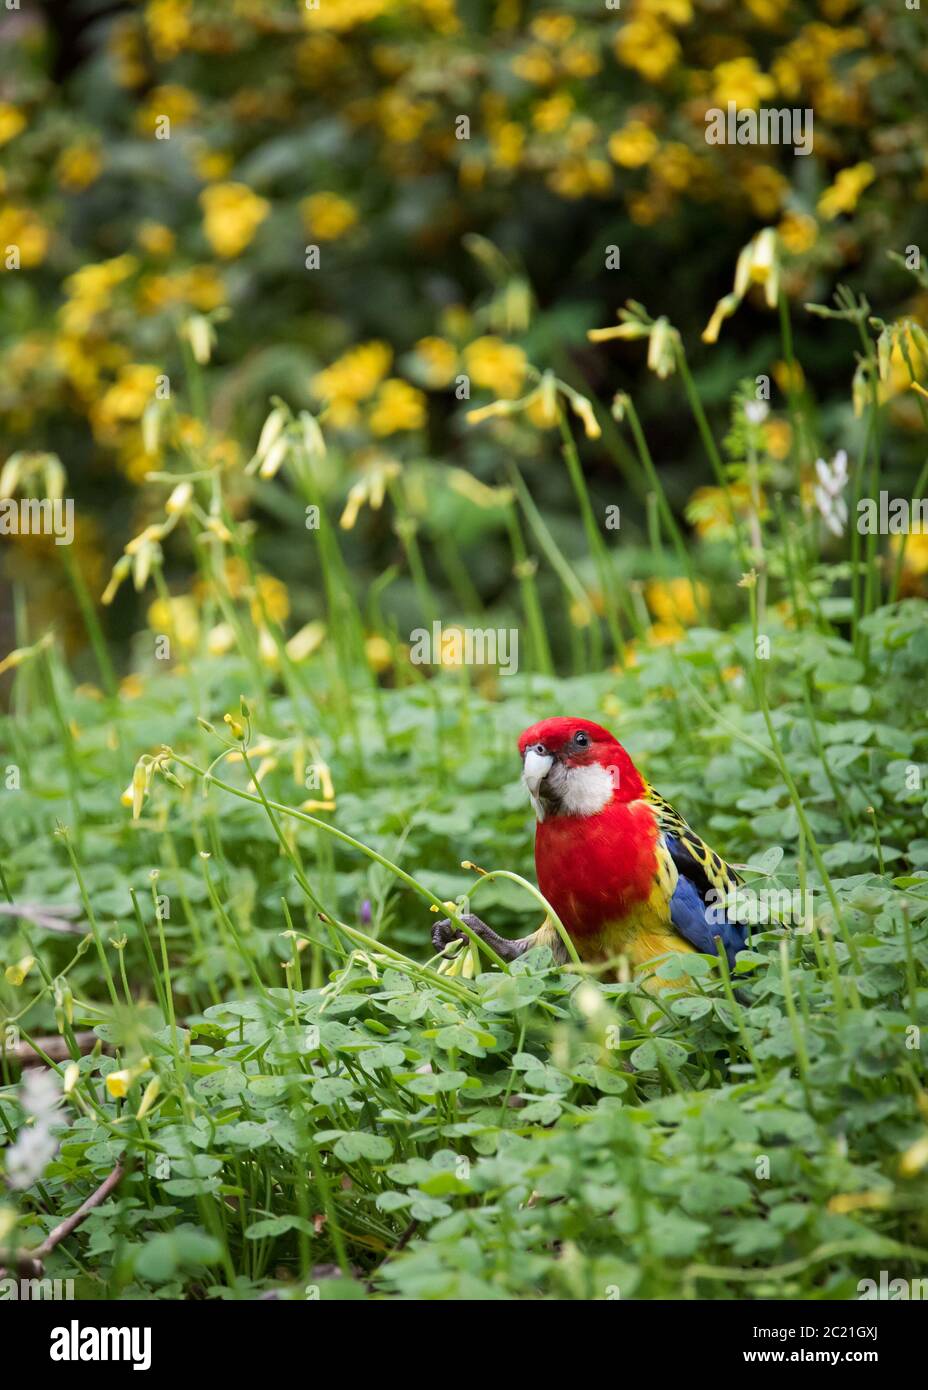 A Crimson Rosella forages for a meal among some Oxalis pes-caprae at Morialta Conservation Park in Adelaide, South Australia. Stock Photo